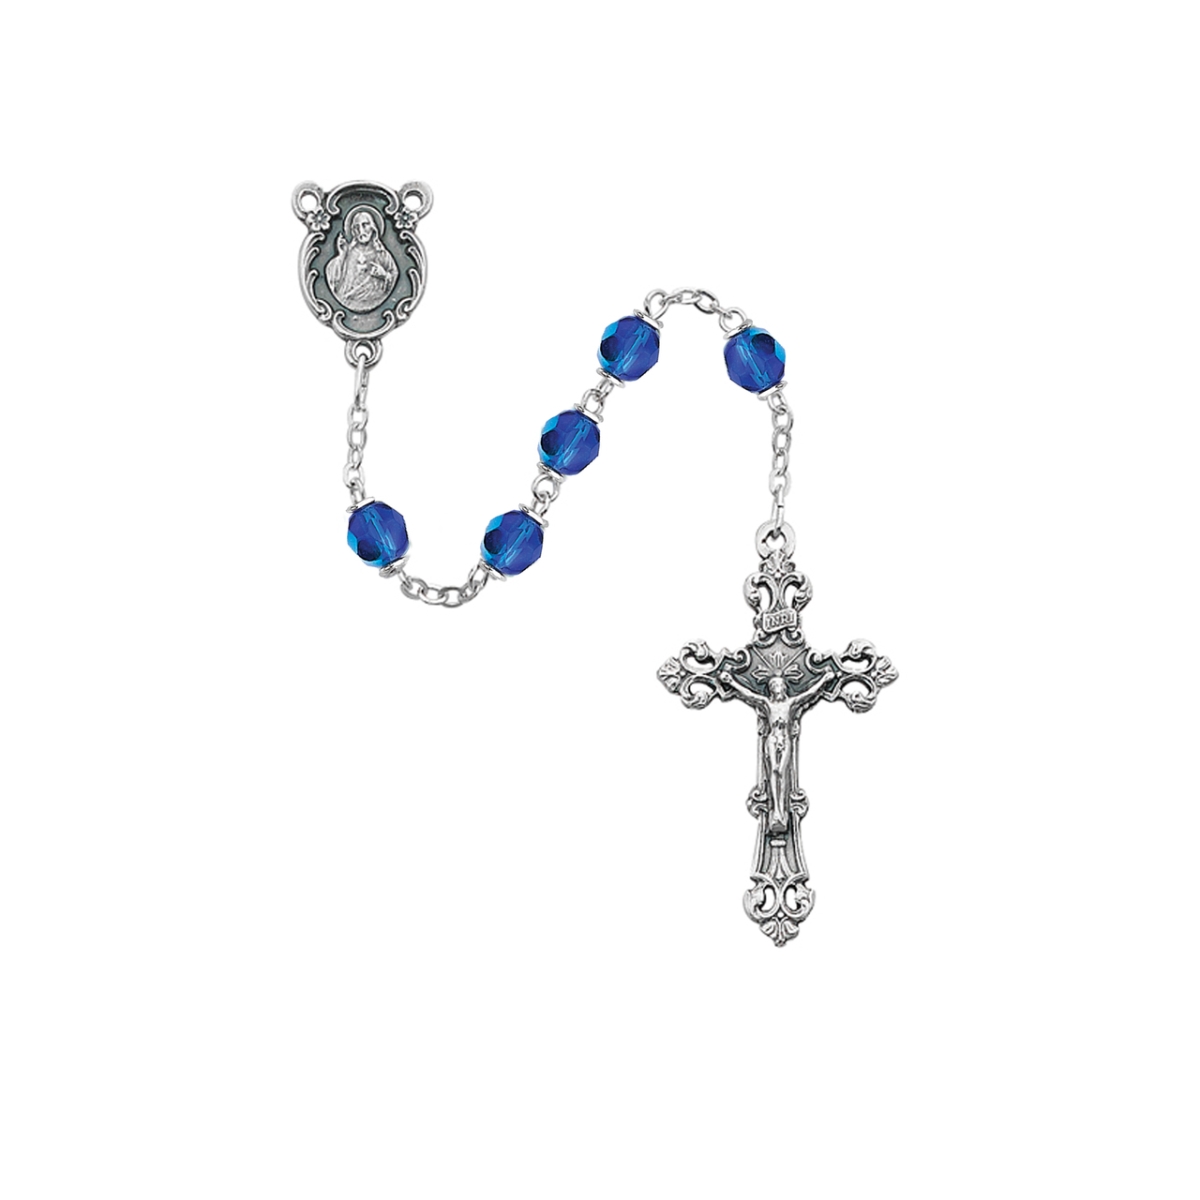 Picture of McVan 875-ZRG 6 mm Glass September Cross & Rosary Set with Silver Oxidized Center - Dark Blue